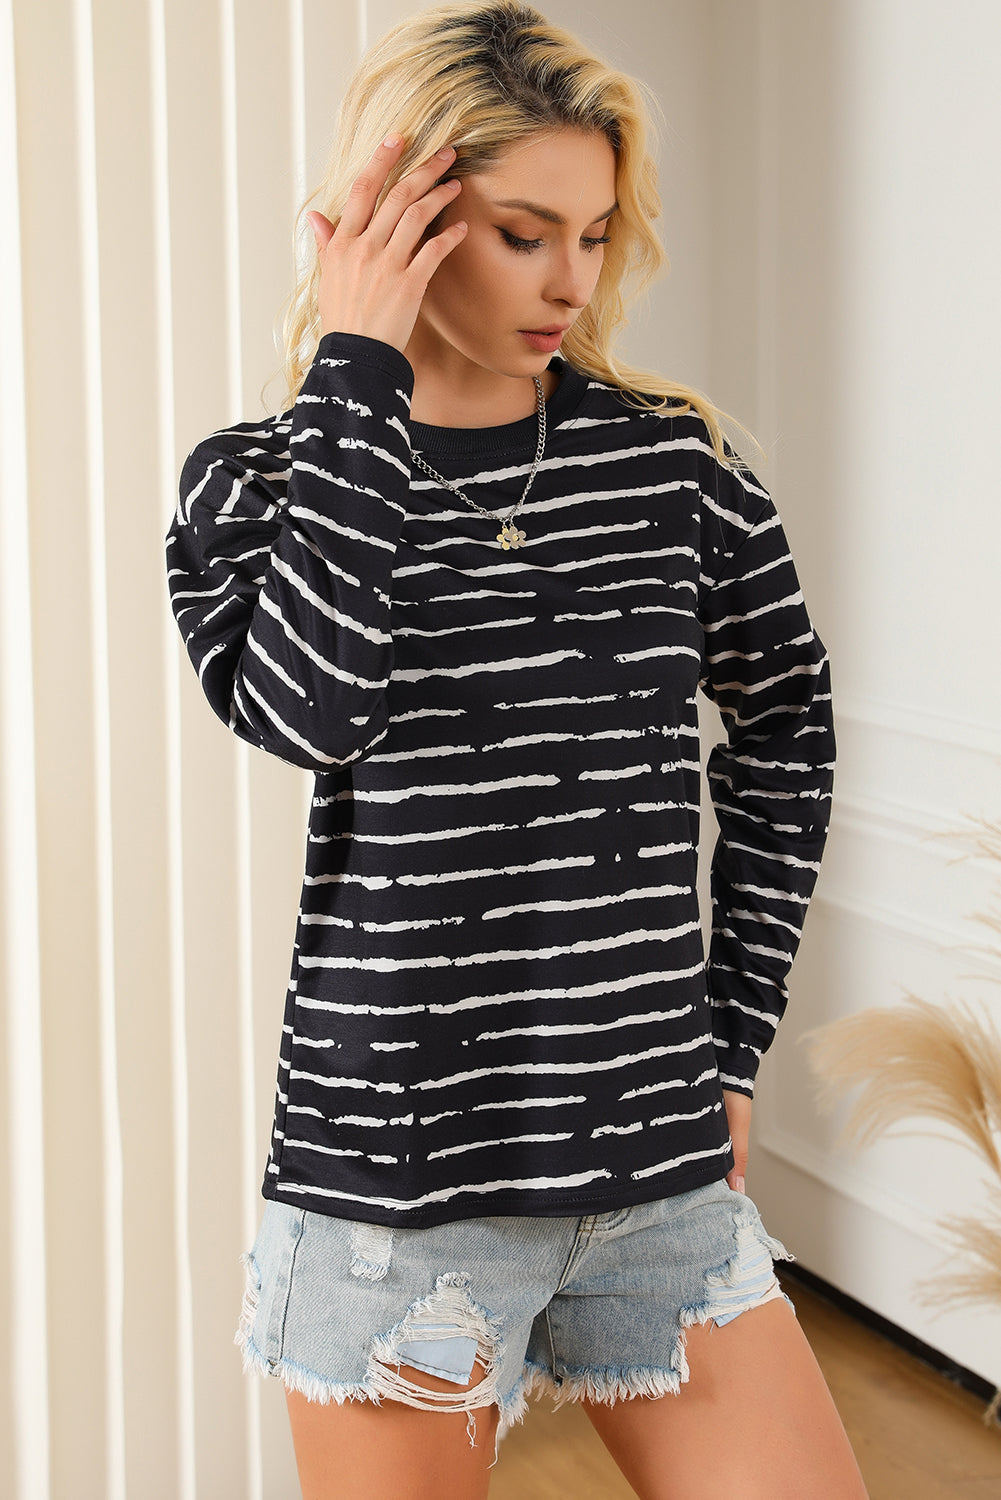 White Retro Striped Casual Long Sleeve Top